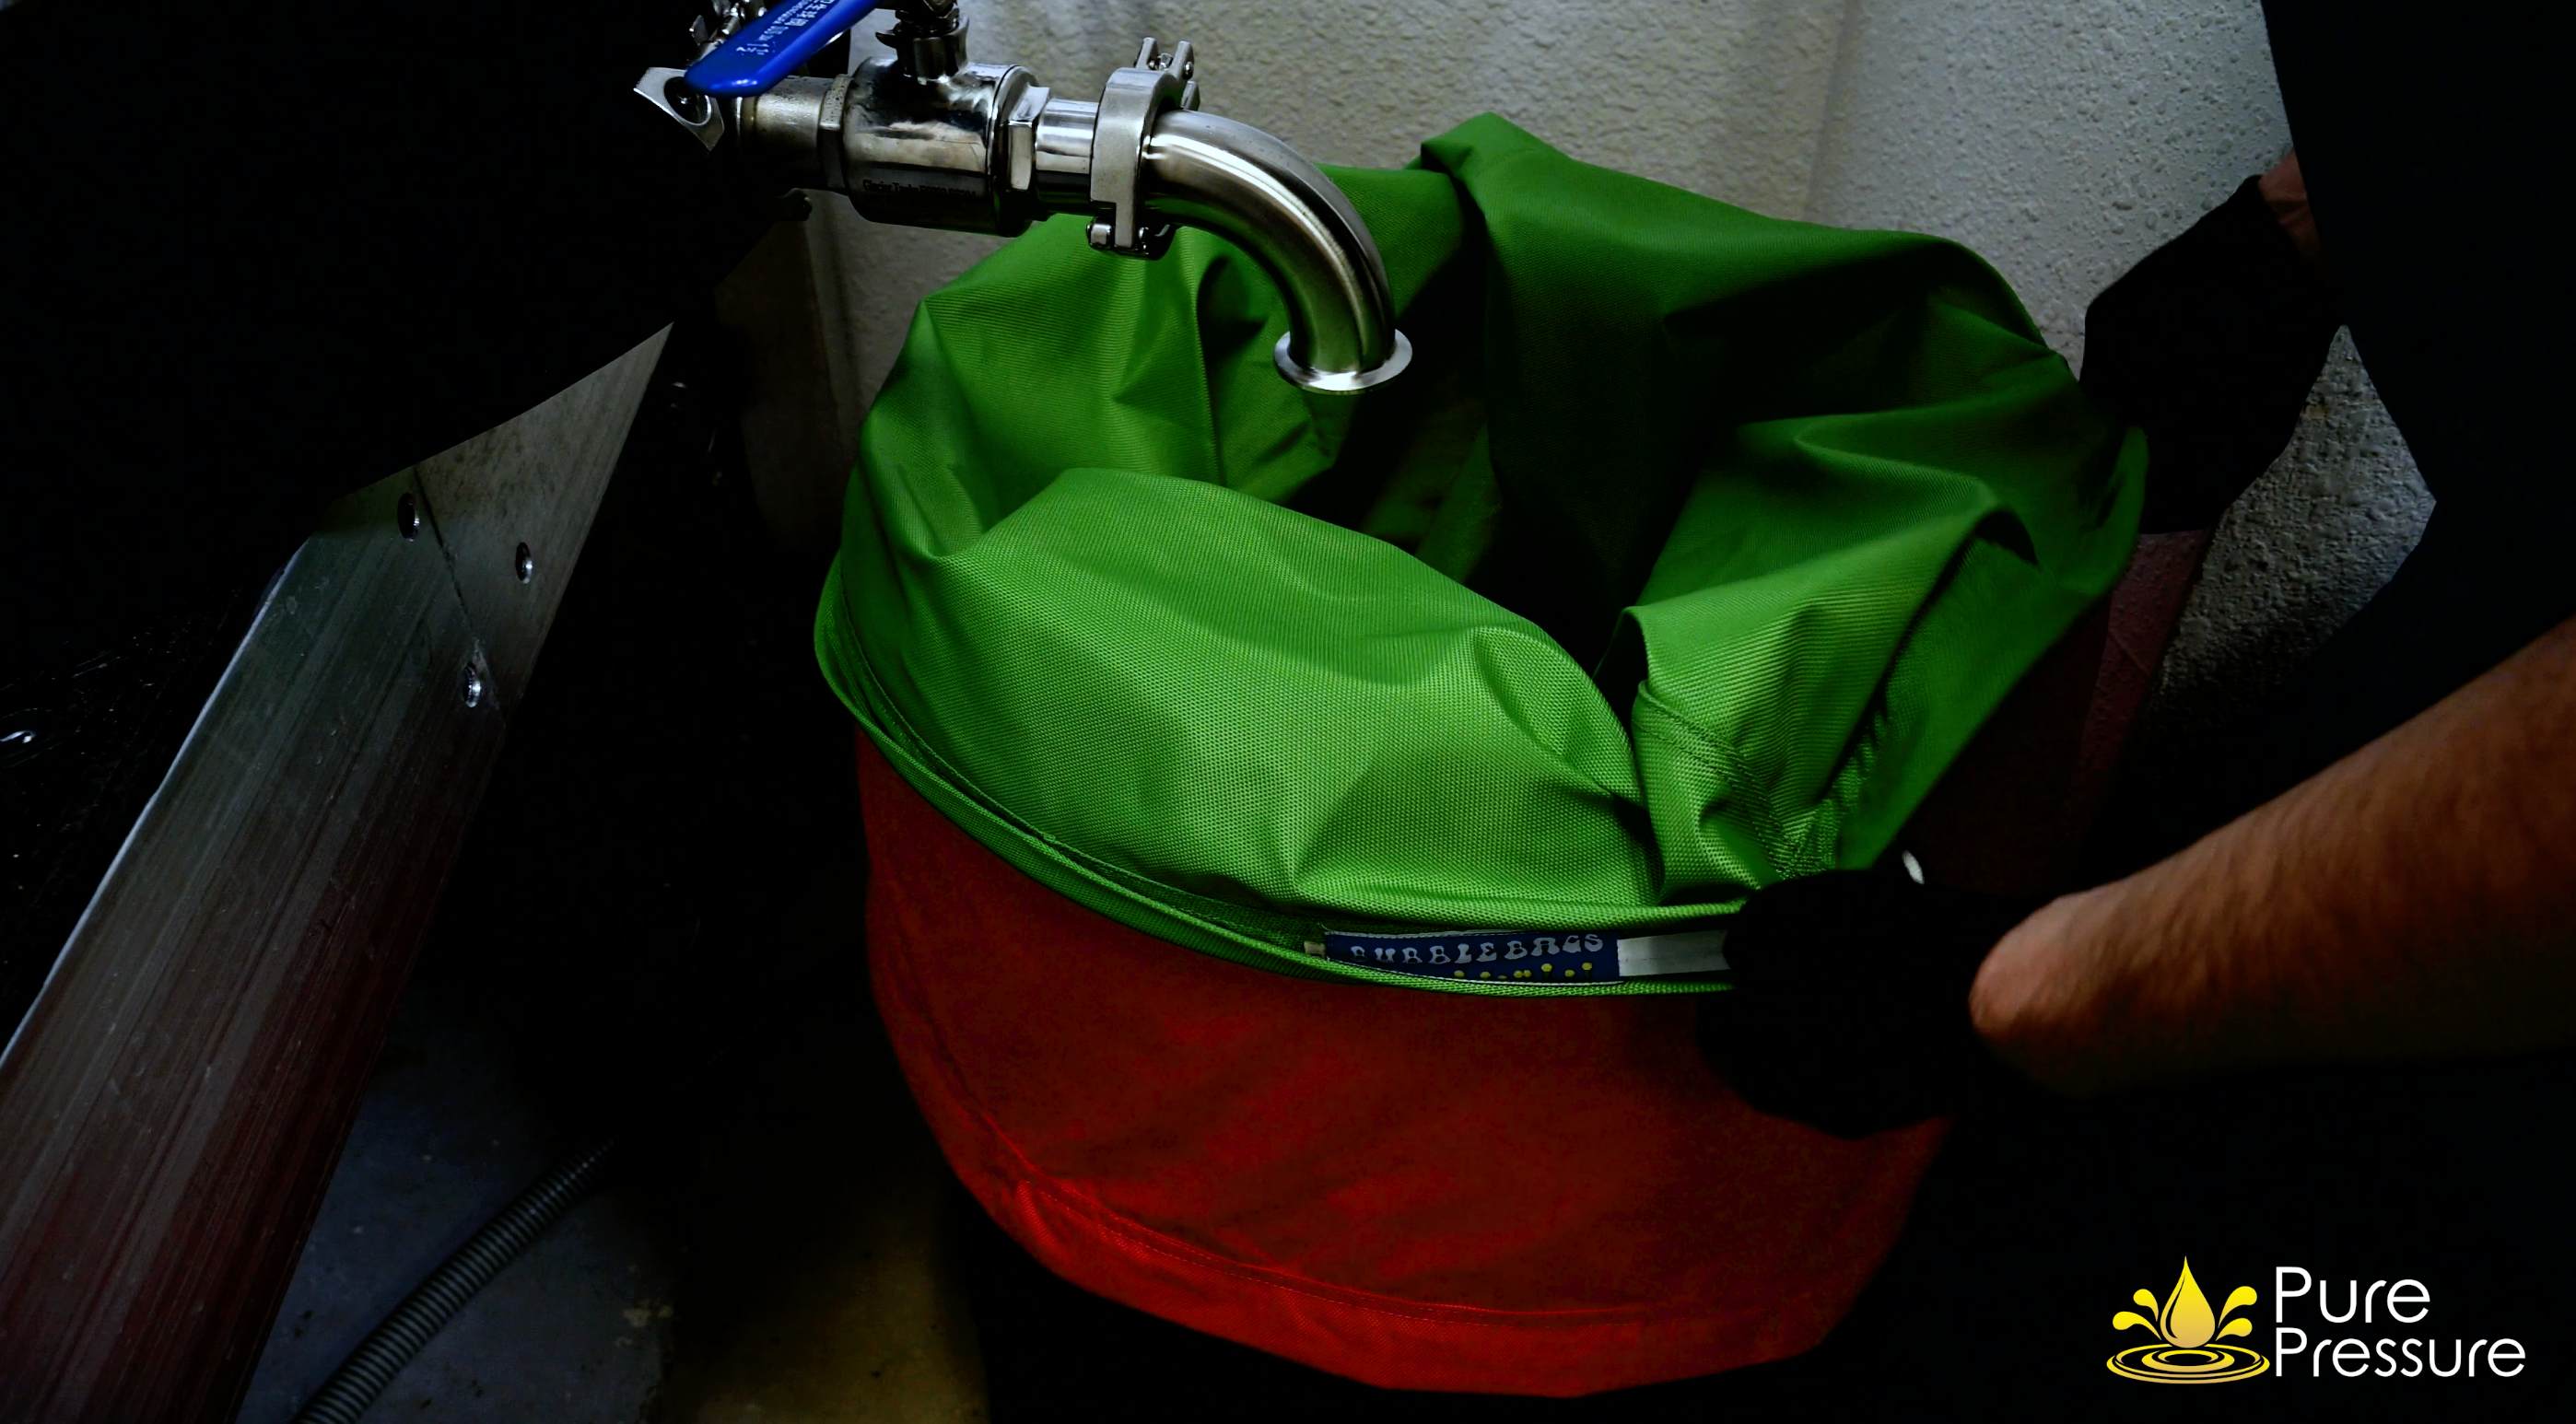 bubble bags layered in a PurePressure Bruteless hash washing vessel